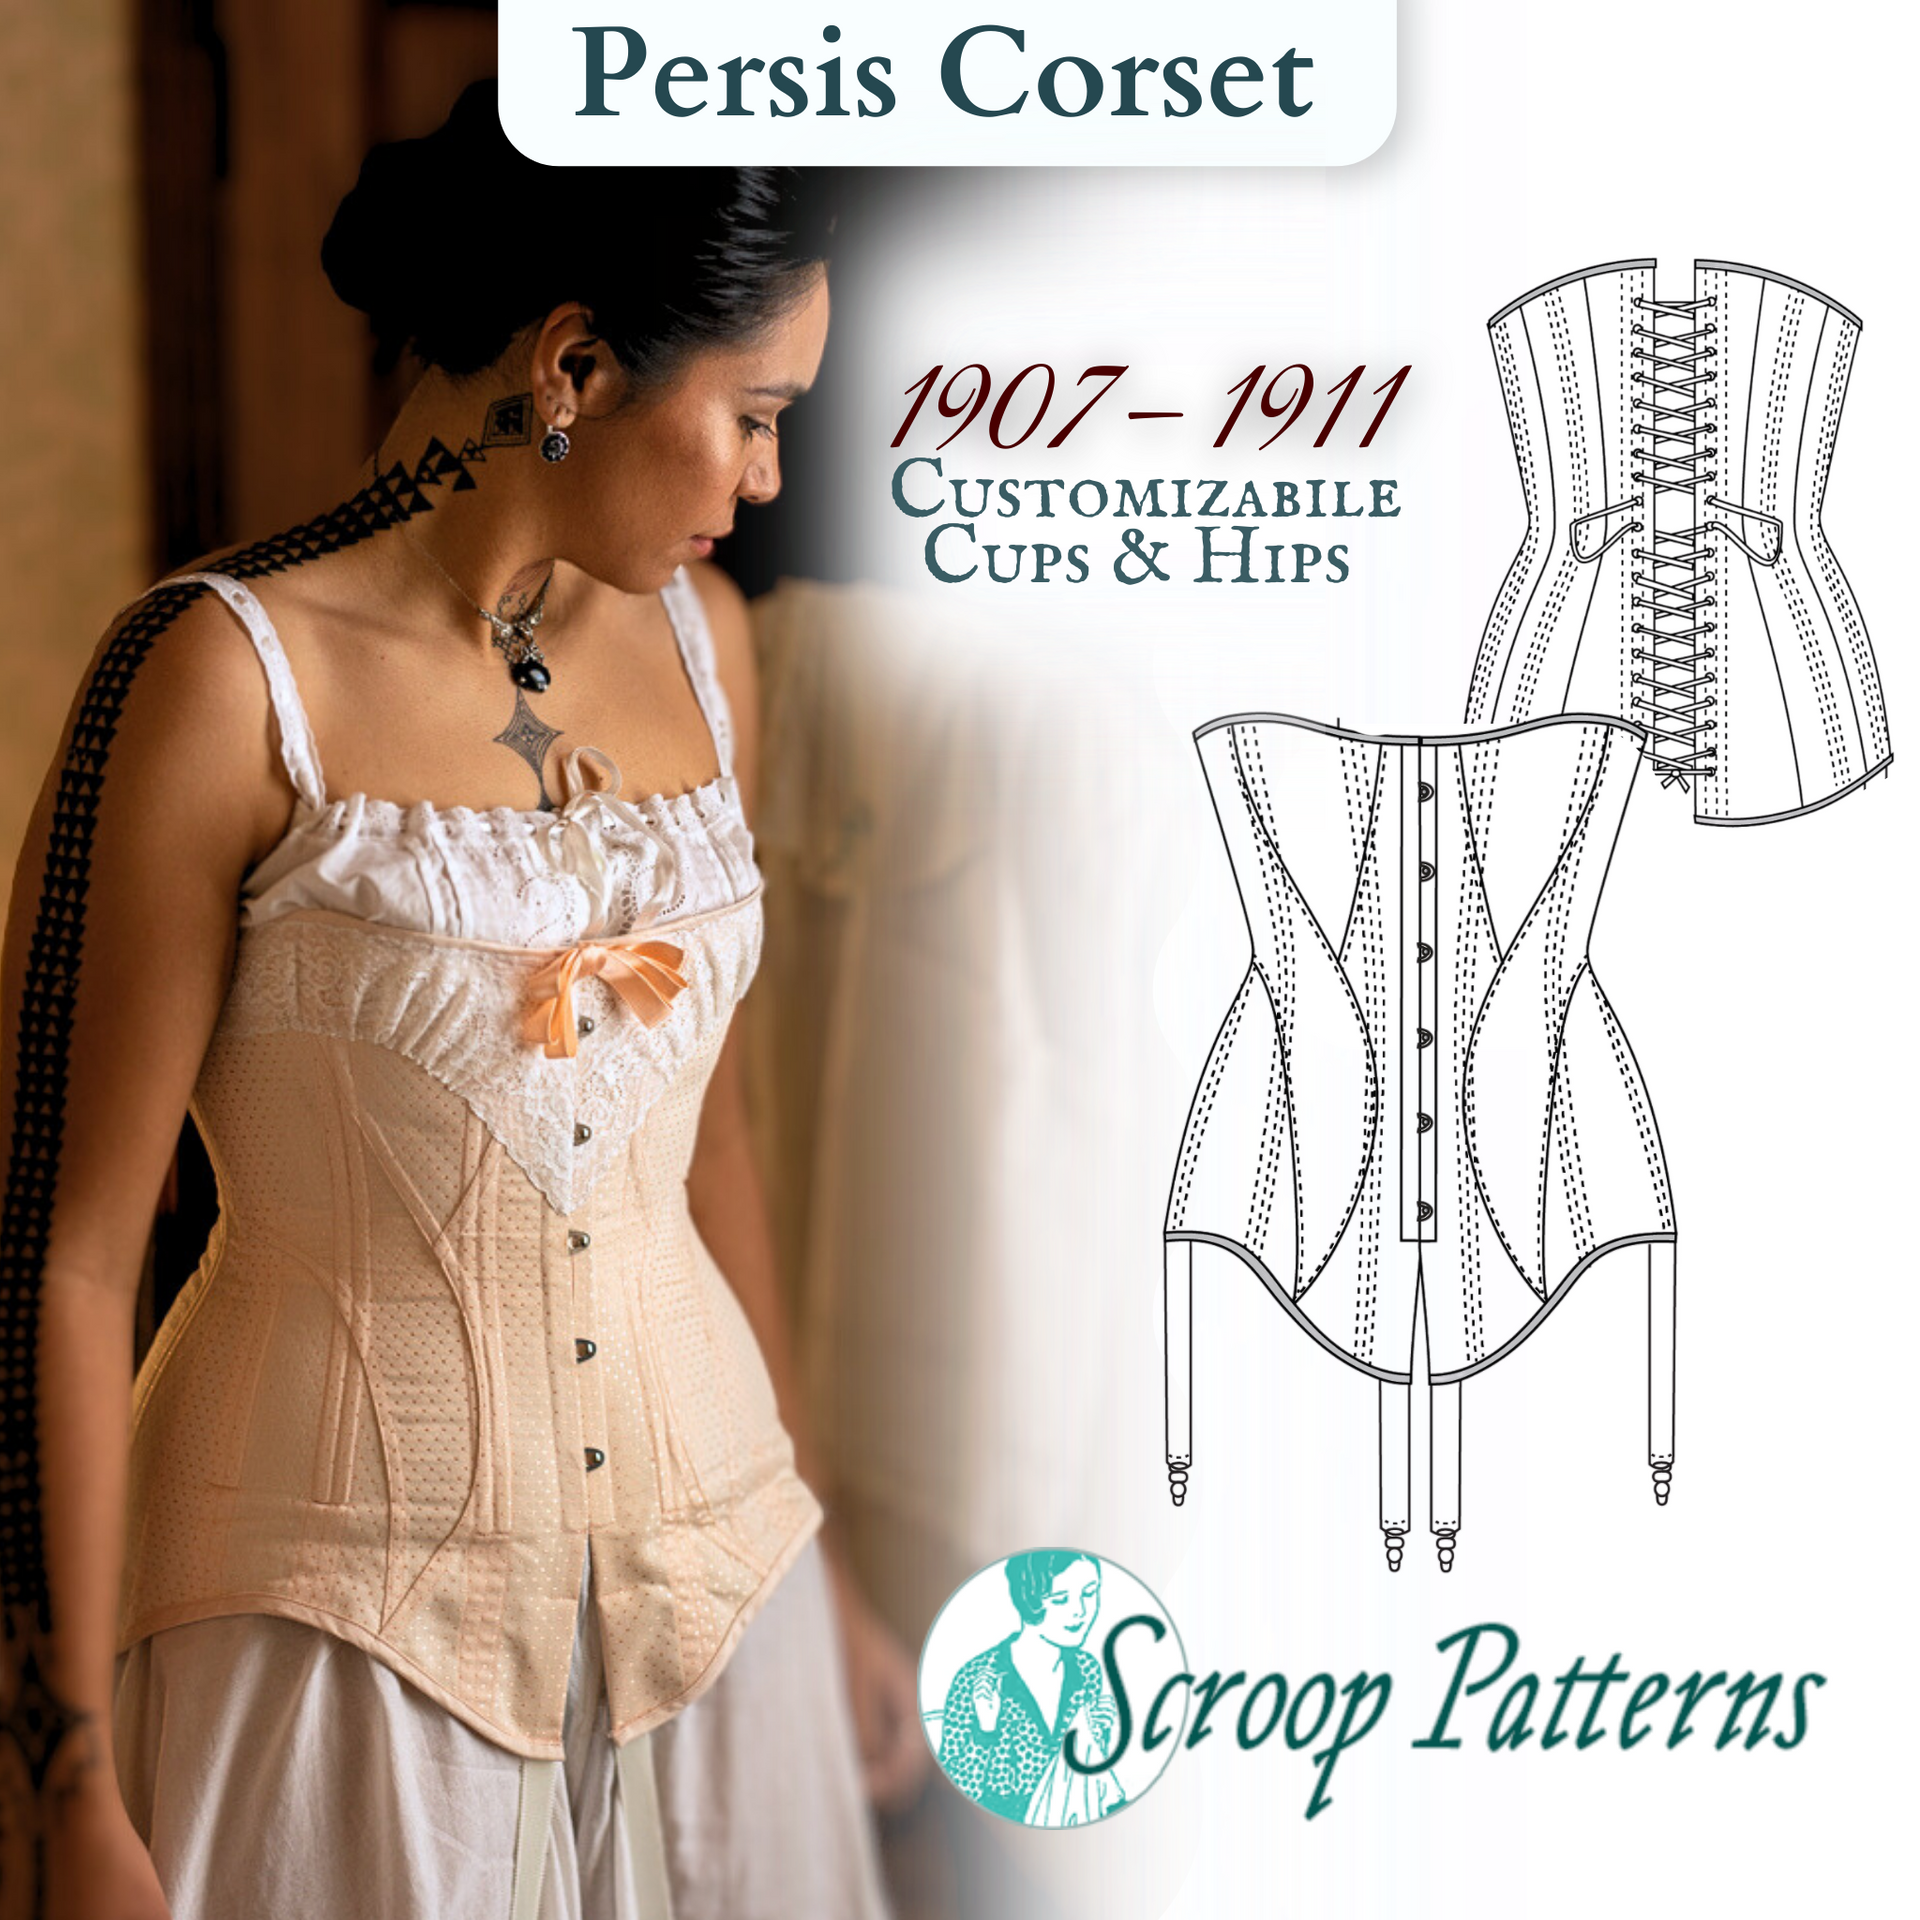 Vintage Sewing Pattern Ladies 1910s 1920s Style Foundation Corset